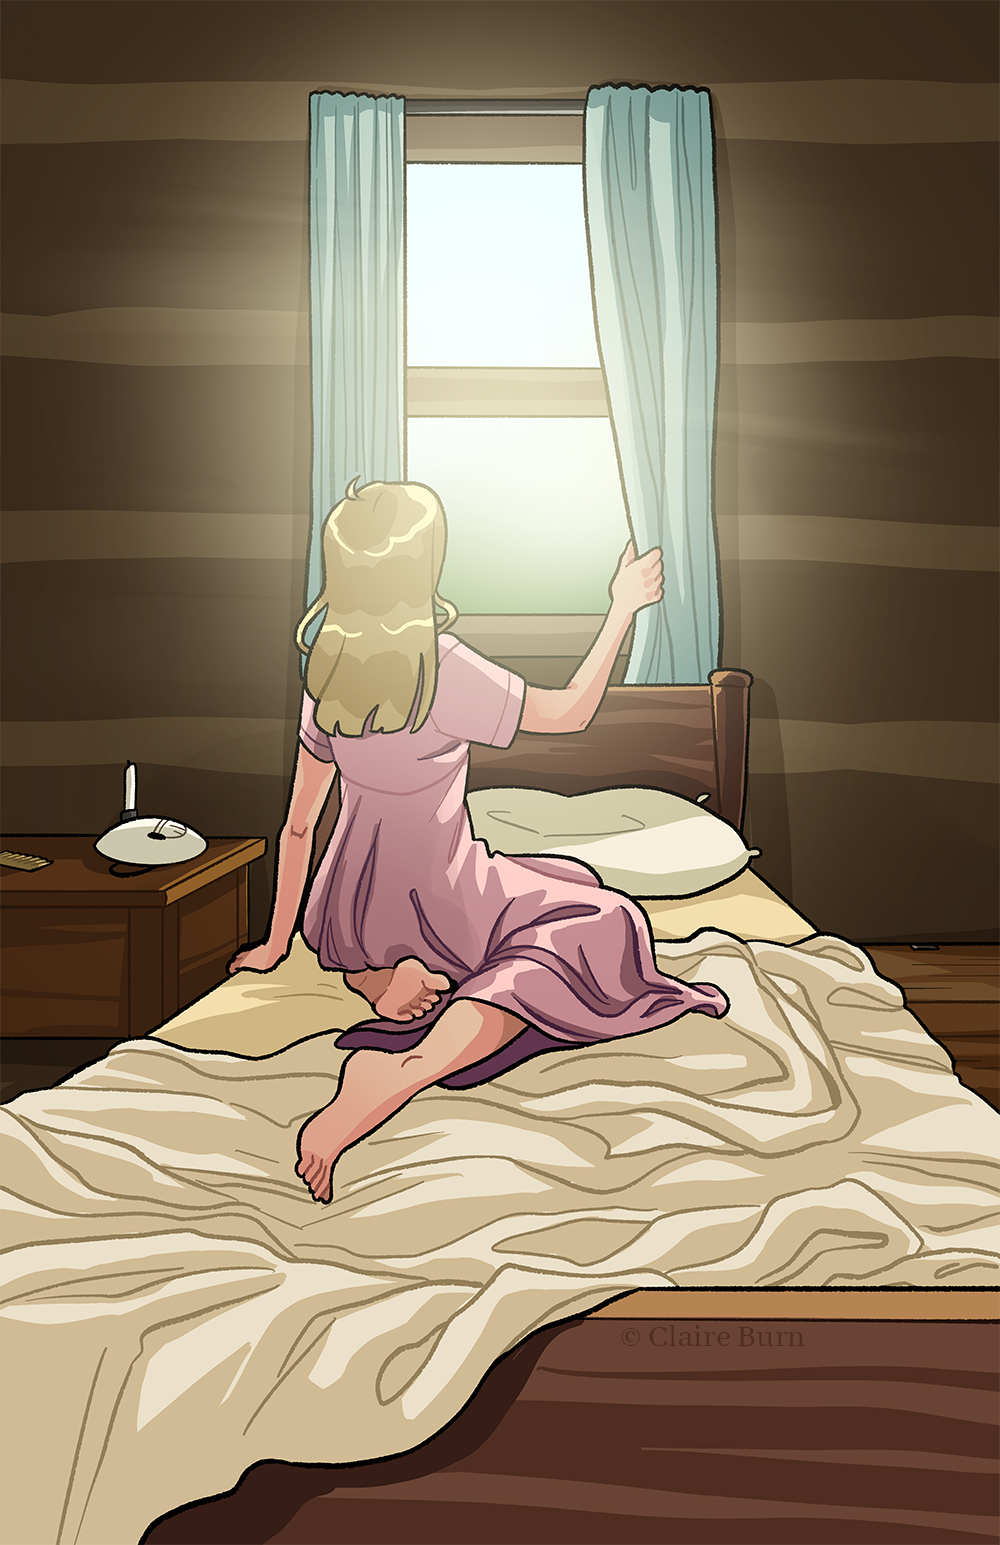 Halla sits up in bed and looks out the sunny window behind her.